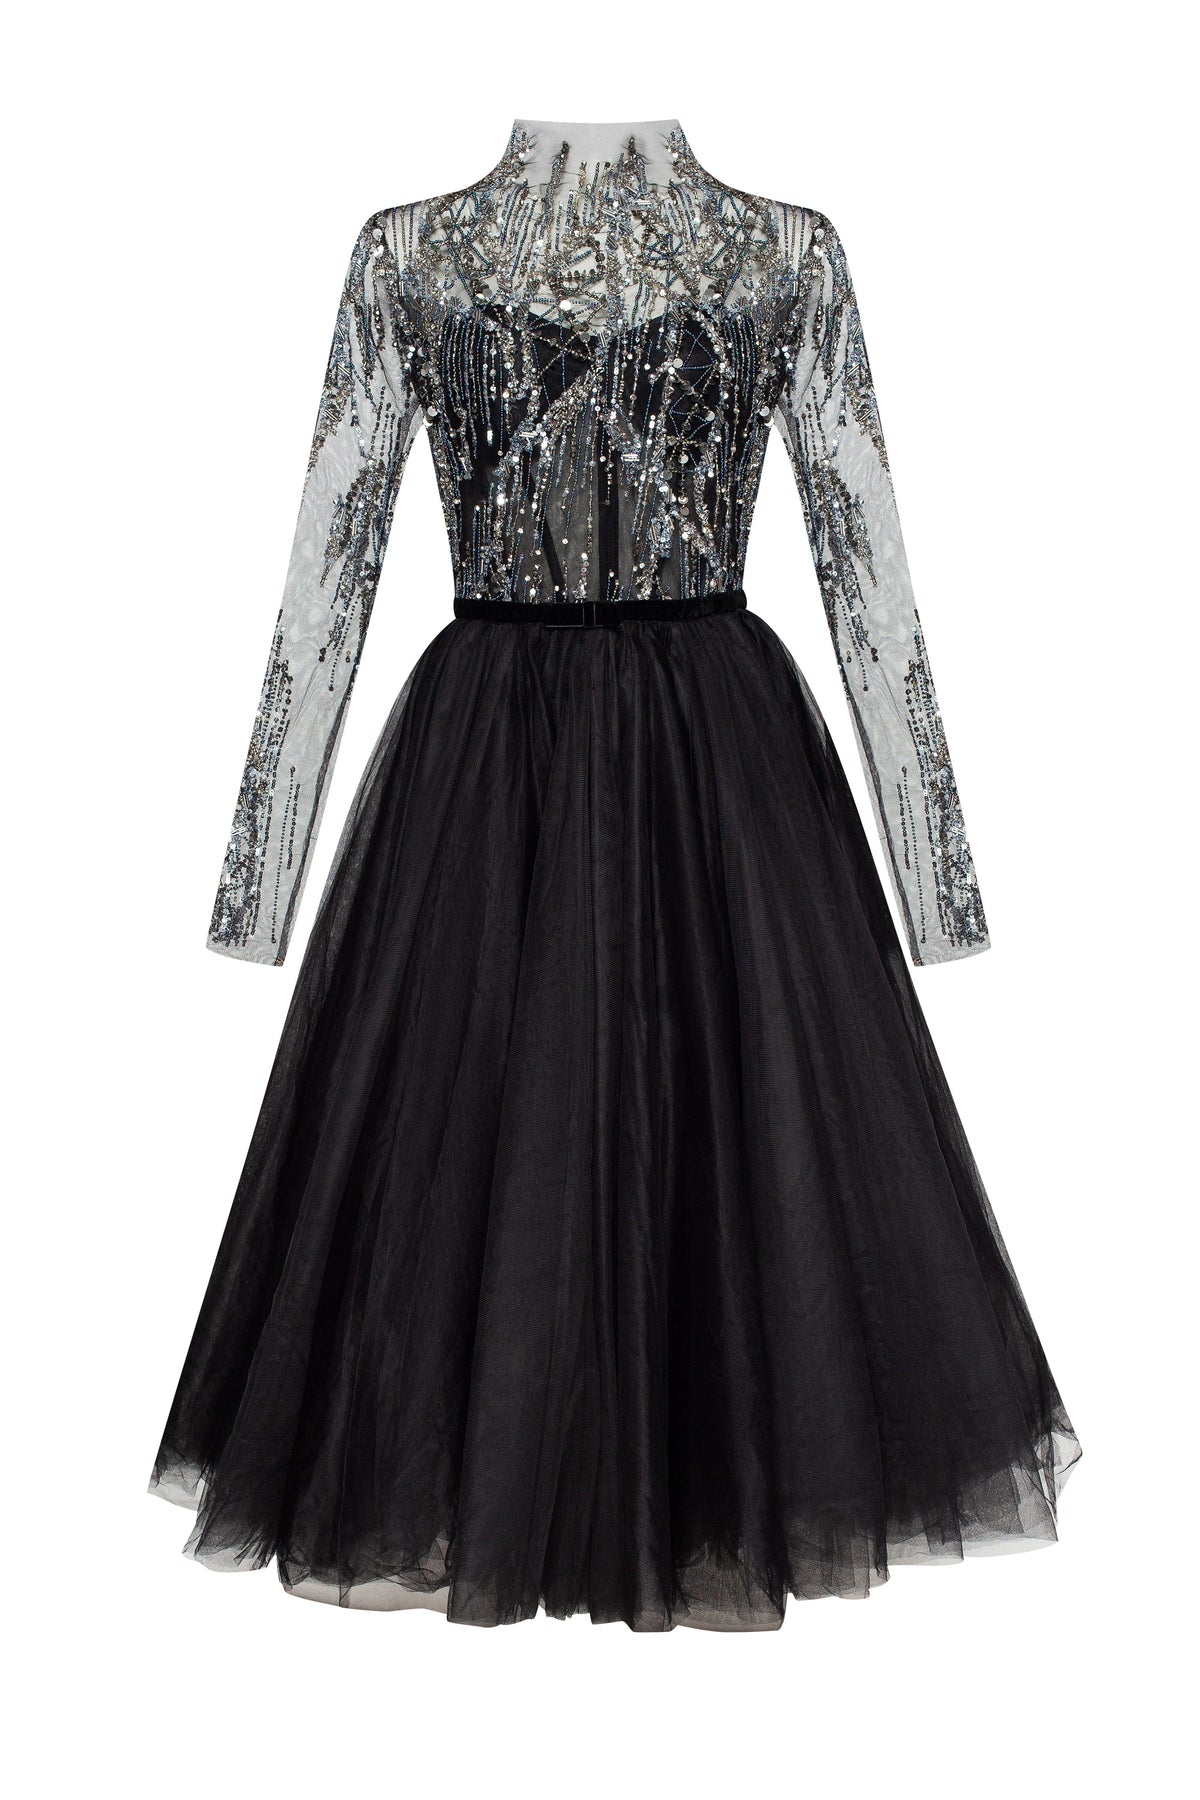 Gorgeous dress with embellished overlay blouse Milla Dresses